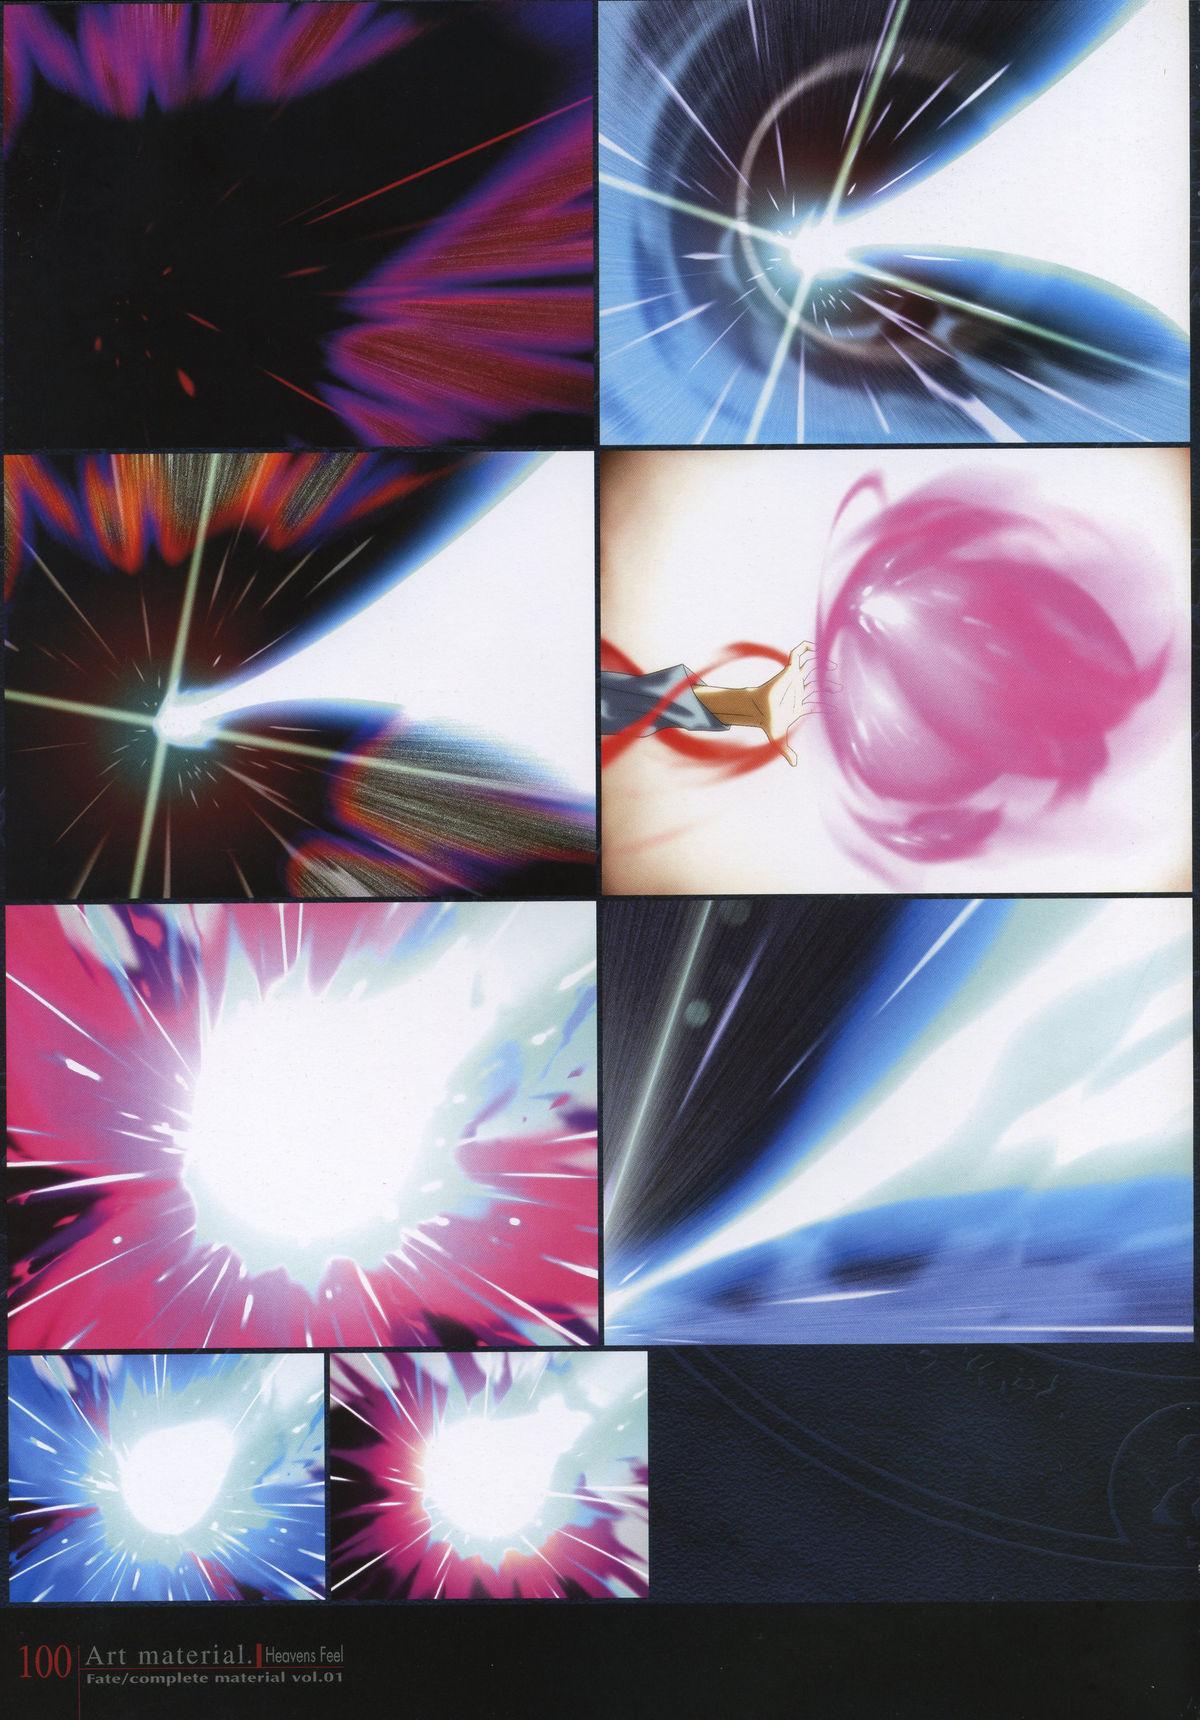 Fate/complete material I - Art material. 104